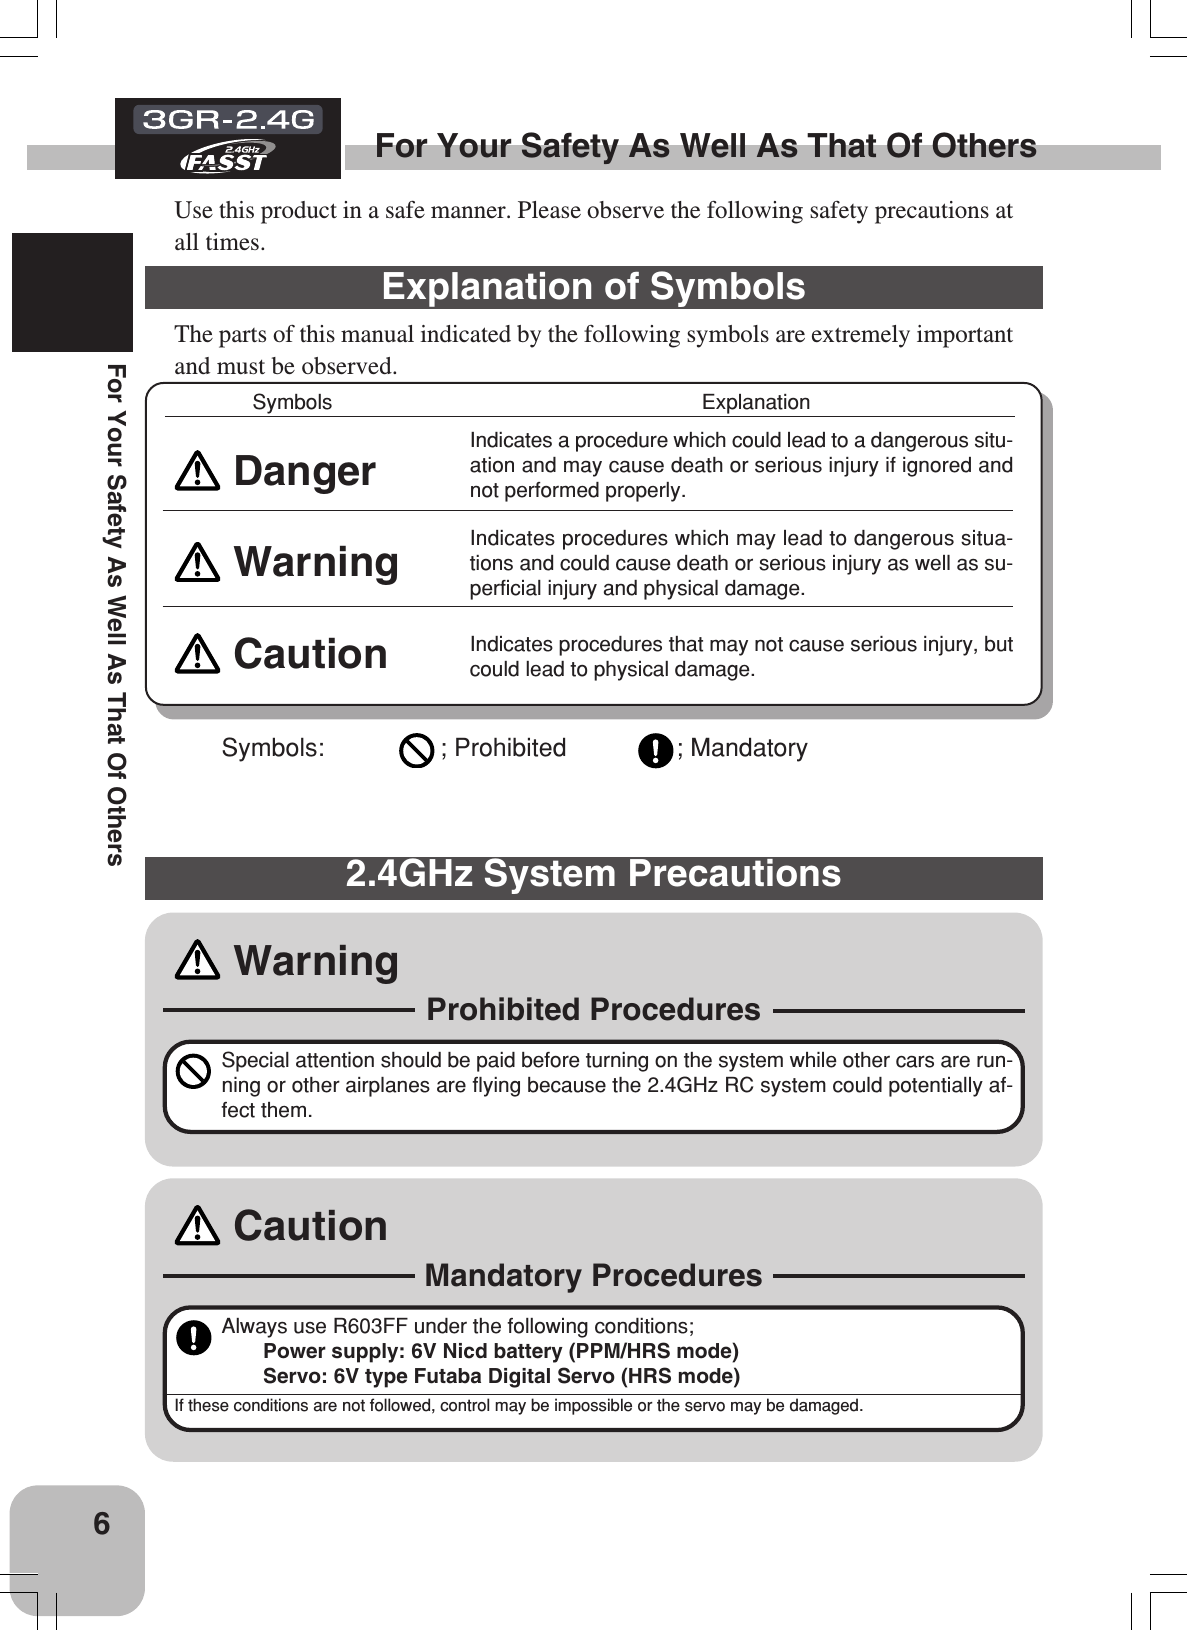 6For Your Safety As Well As That Of OthersFor Your Safety As Well As That Of OthersUse this product in a safe manner. Please observe the following safety precautions atall times.Explanation of SymbolsThe parts of this manual indicated by the following symbols are extremely importantand must be observed.DangerIndicates a procedure which could lead to a dangerous situ-ation and may cause death or serious injury if ignored andnot performed properly.Warning Indicates procedures which may lead to dangerous situa-tions and could cause death or serious injury as well as su-perficial injury and physical damage.Caution Indicates procedures that may not cause serious injury, butcould lead to physical damage.Symbols: ; Prohibited ; MandatorySymbols ExplanationSpecial attention should be paid before turning on the system while other cars are run-ning or other airplanes are flying because the 2.4GHz RC system could potentially af-fect them.Warning2.4GHz System PrecautionsProhibited ProceduresAlways use R603FF under the following conditions;Power supply: 6V Nicd battery (PPM/HRS mode)Servo: 6V type Futaba Digital Servo (HRS mode)If these conditions are not followed, control may be impossible or the servo may be damaged.CautionMandatory Procedures